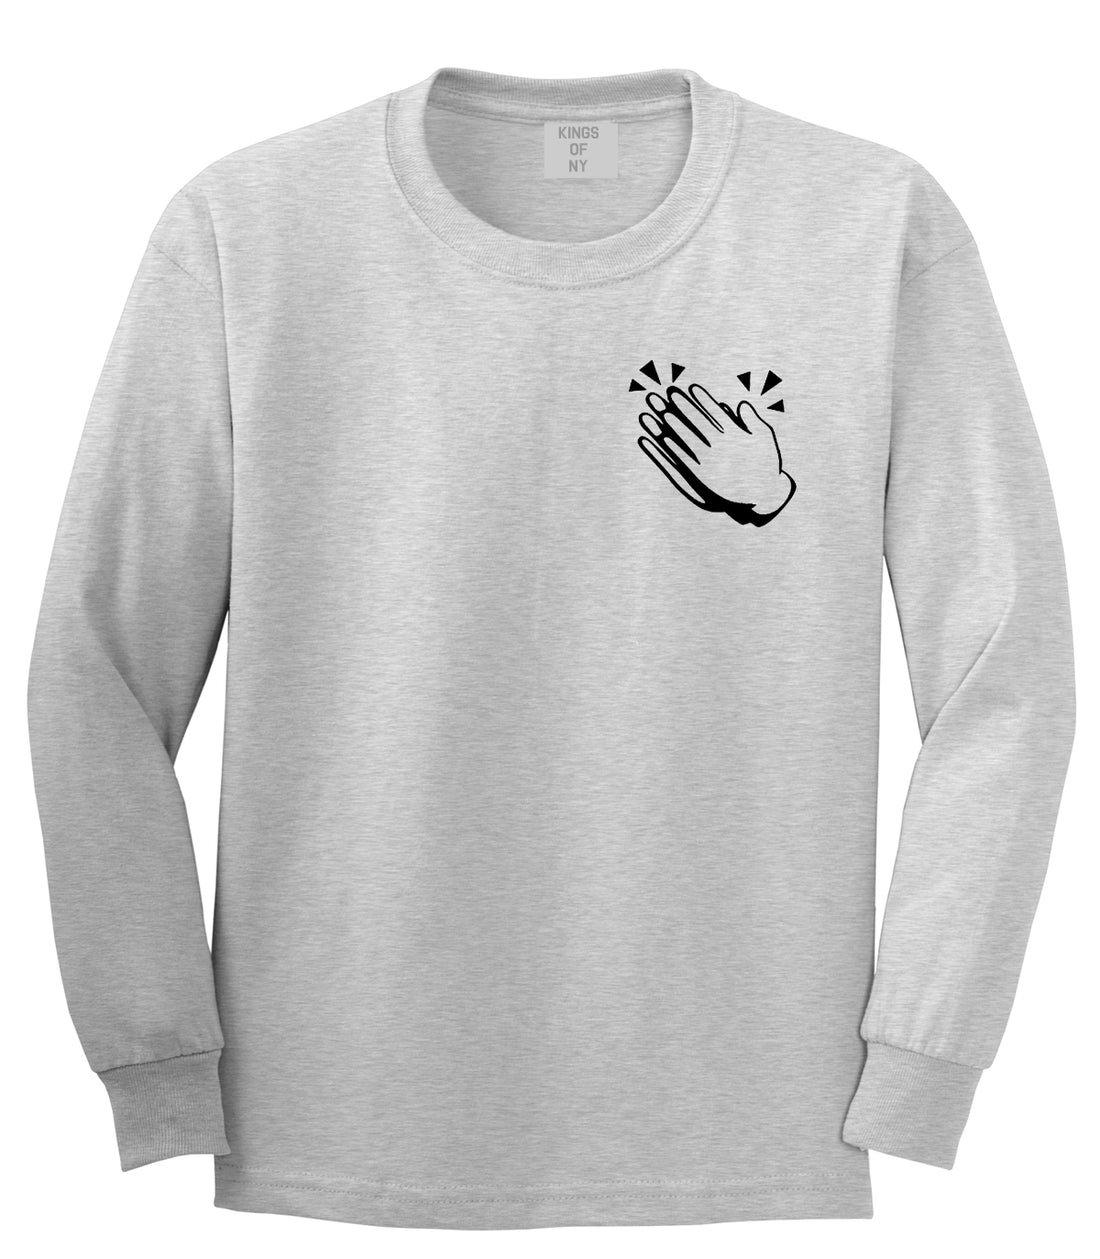 Clapping Hands Emoji Chest Mens Grey Long Sleeve T-Shirt by Kings Of NY